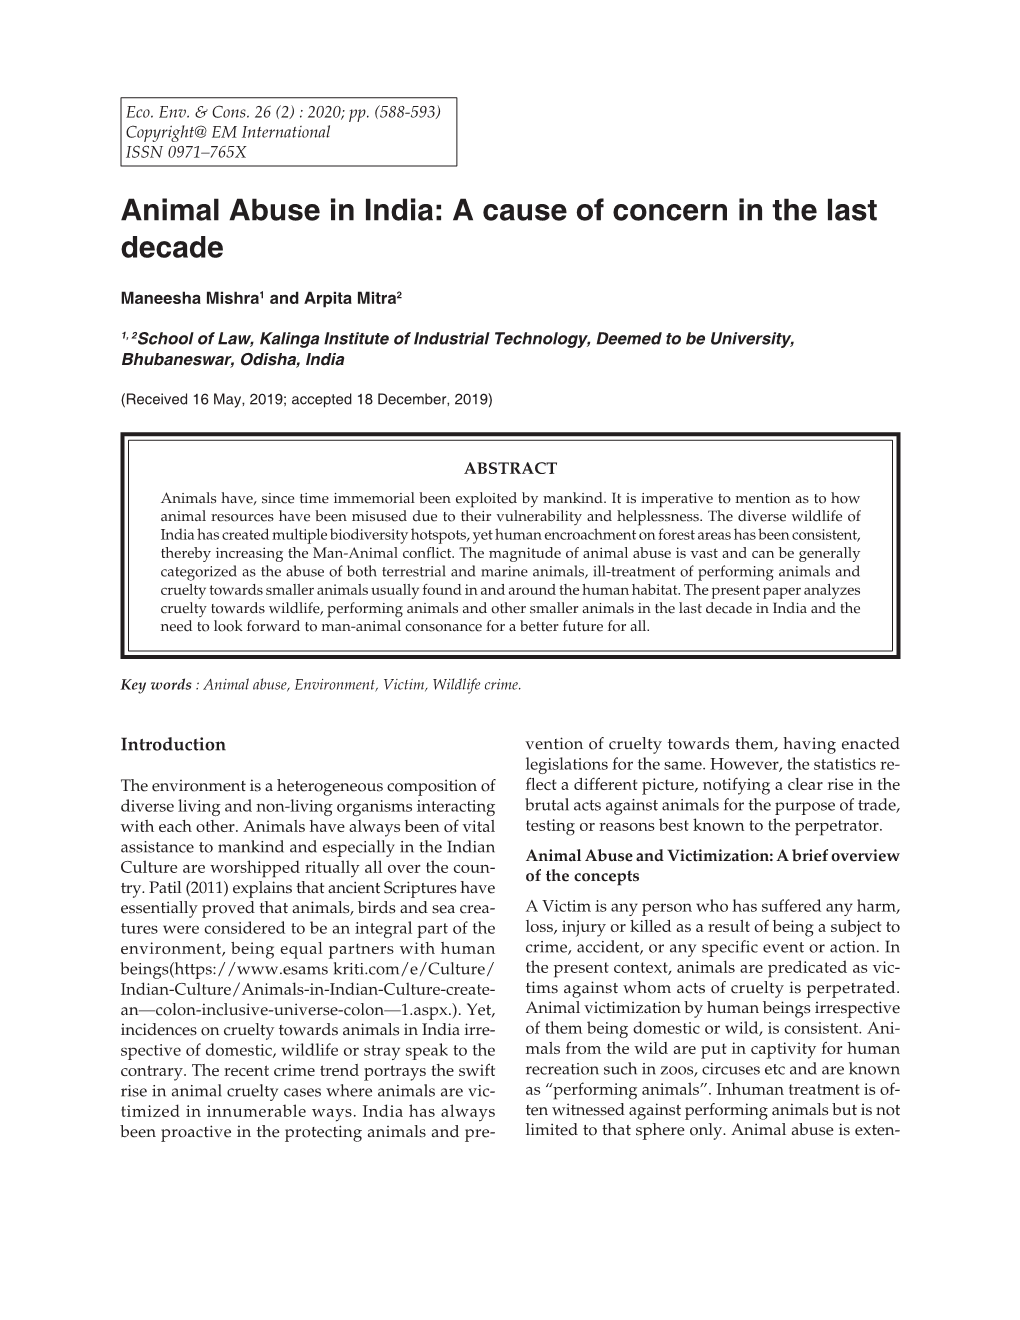 Animal Abuse in India: a Cause of Concern in the Last Decade